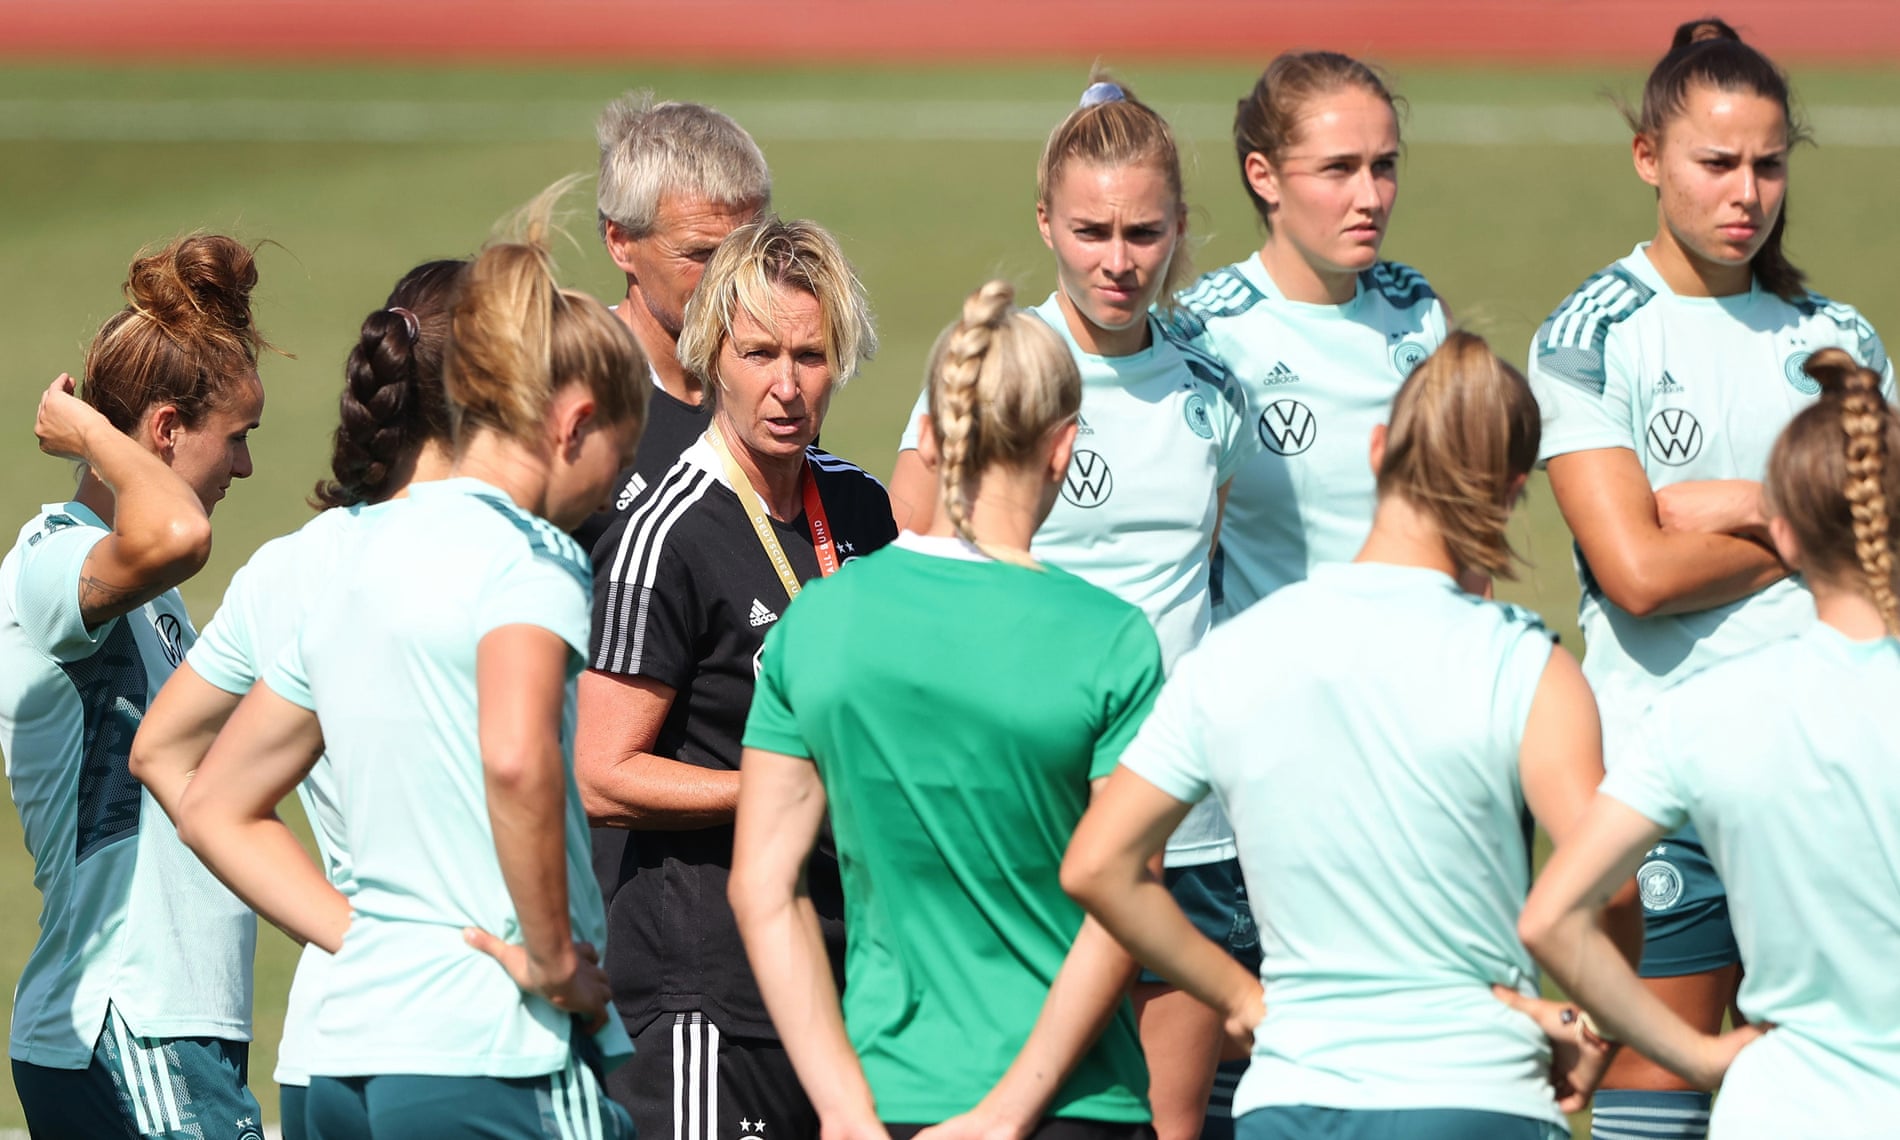 Germany’s head coach, Martina Voss-Tecklenburg, leads a huddle in training.